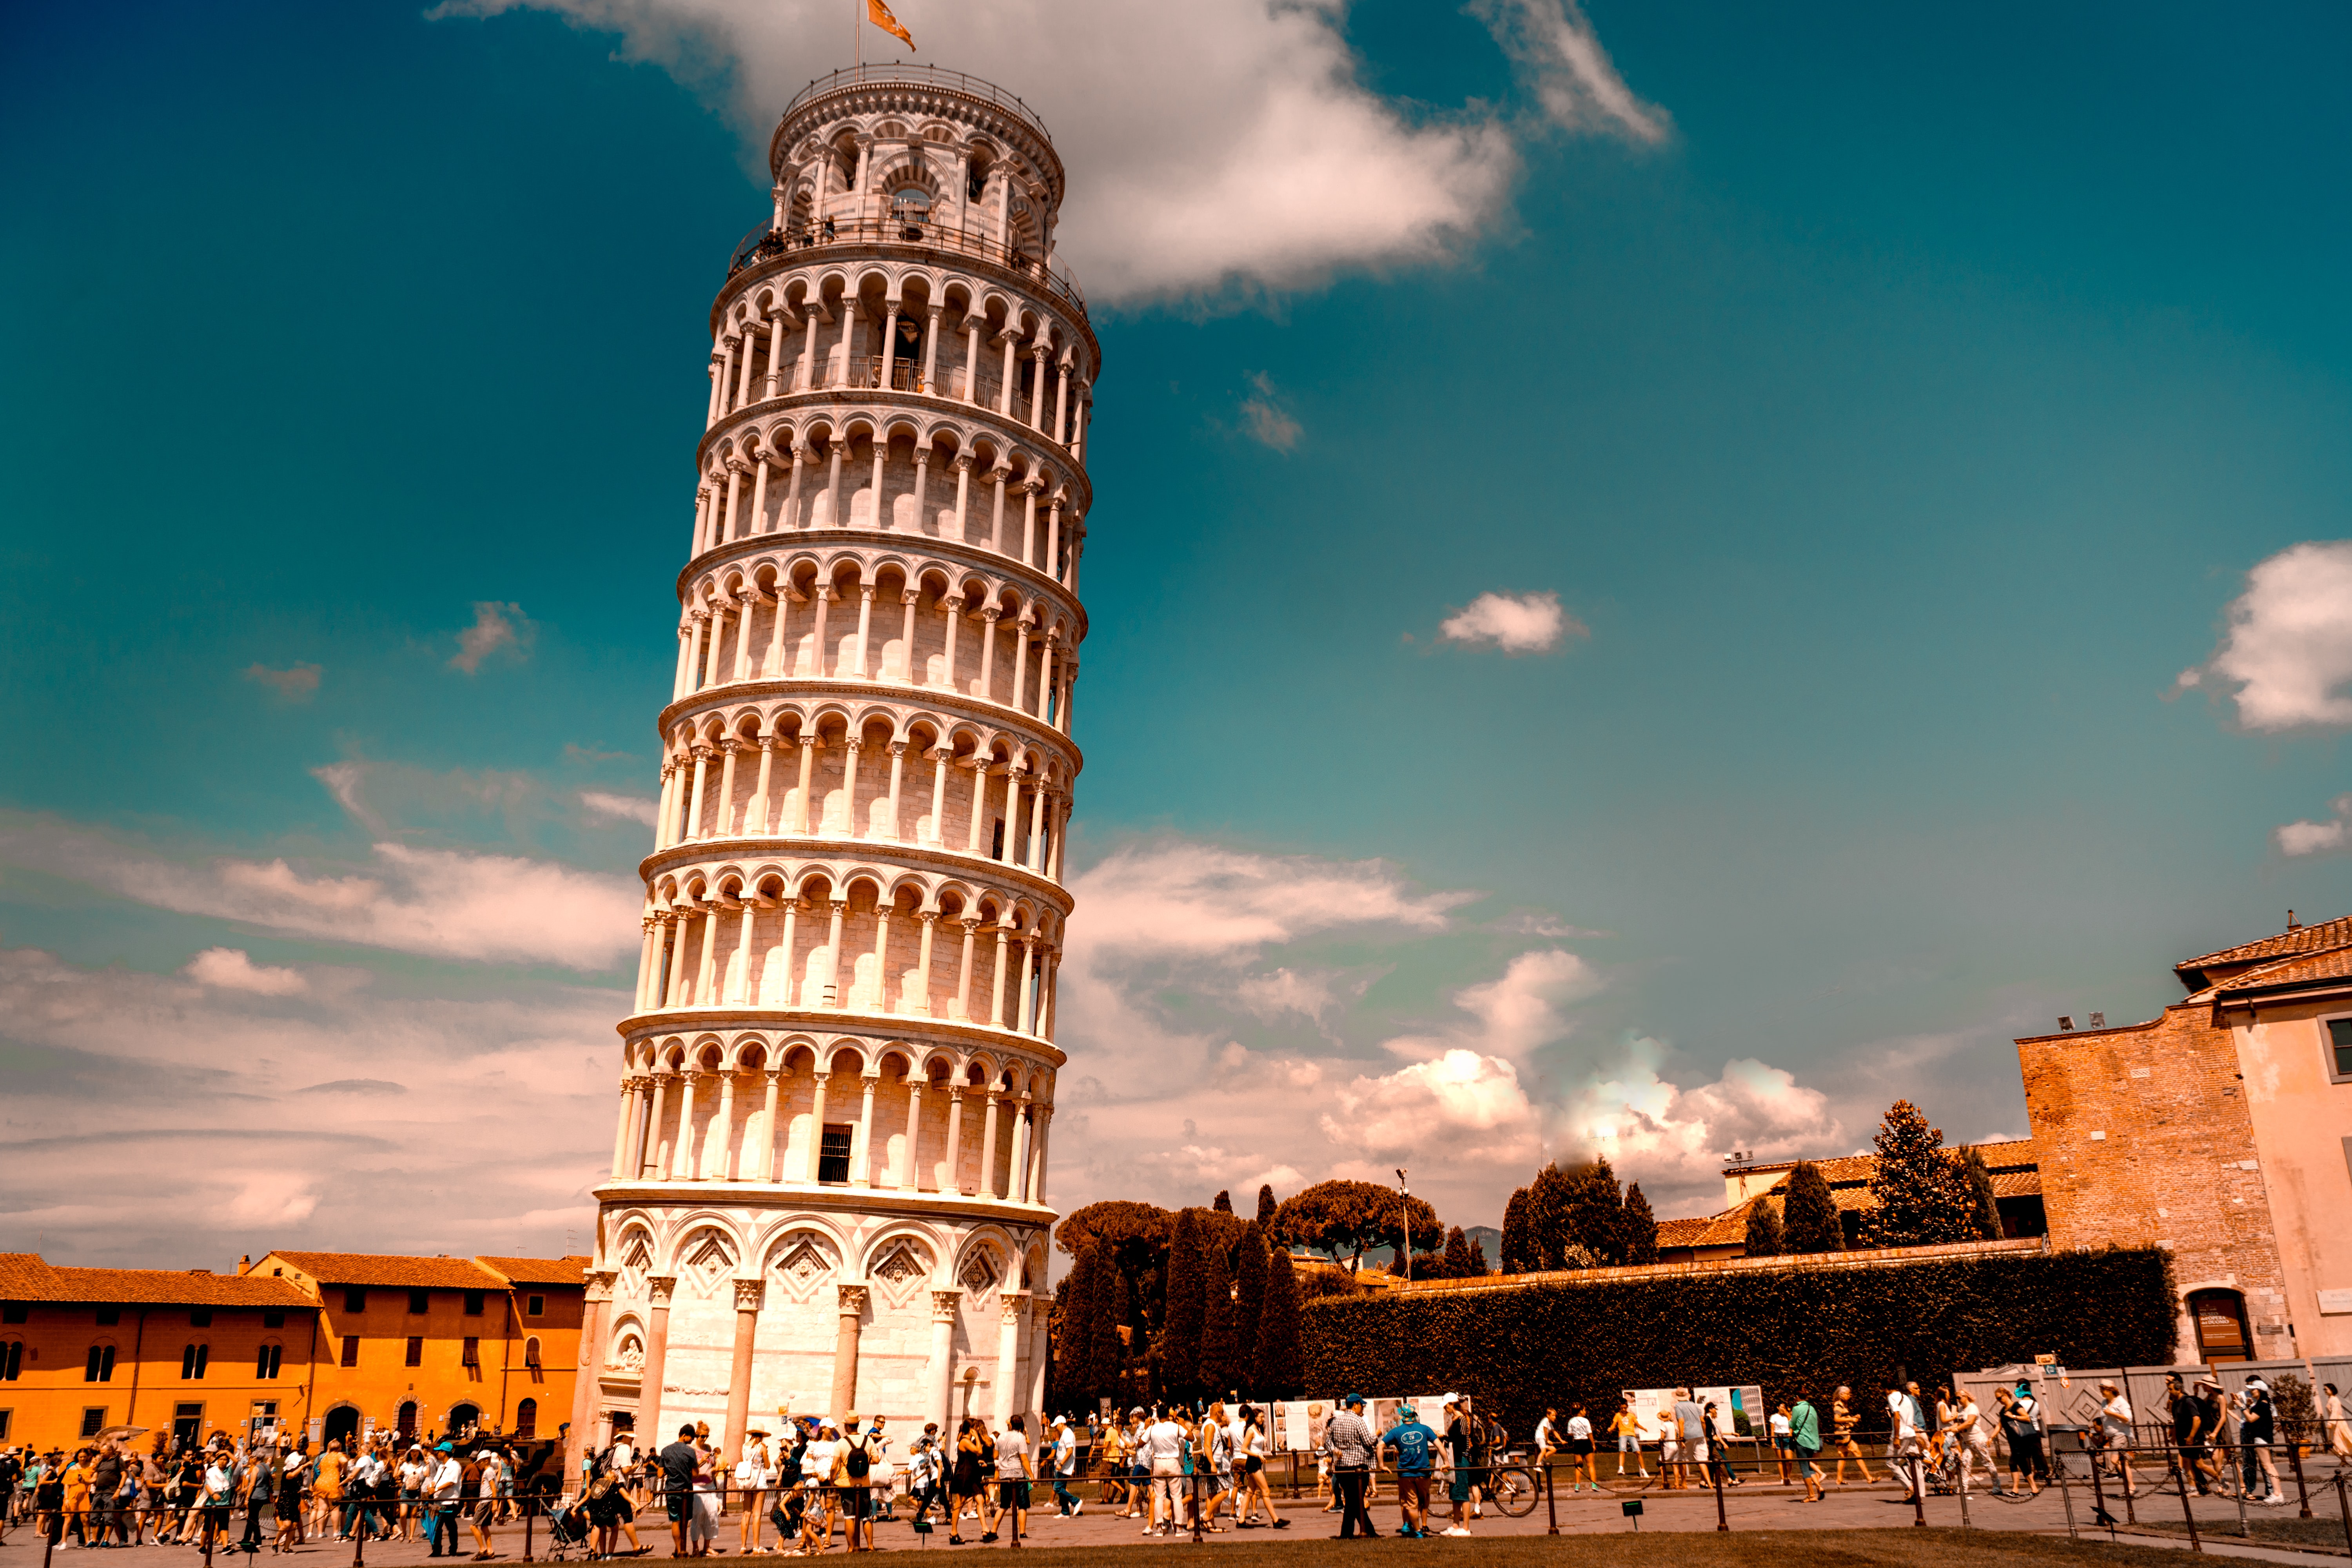 Cover Image for Exploring Pisa: Top 10 things to do in this charming city (more than just The Leaning Tower of Pisa!)